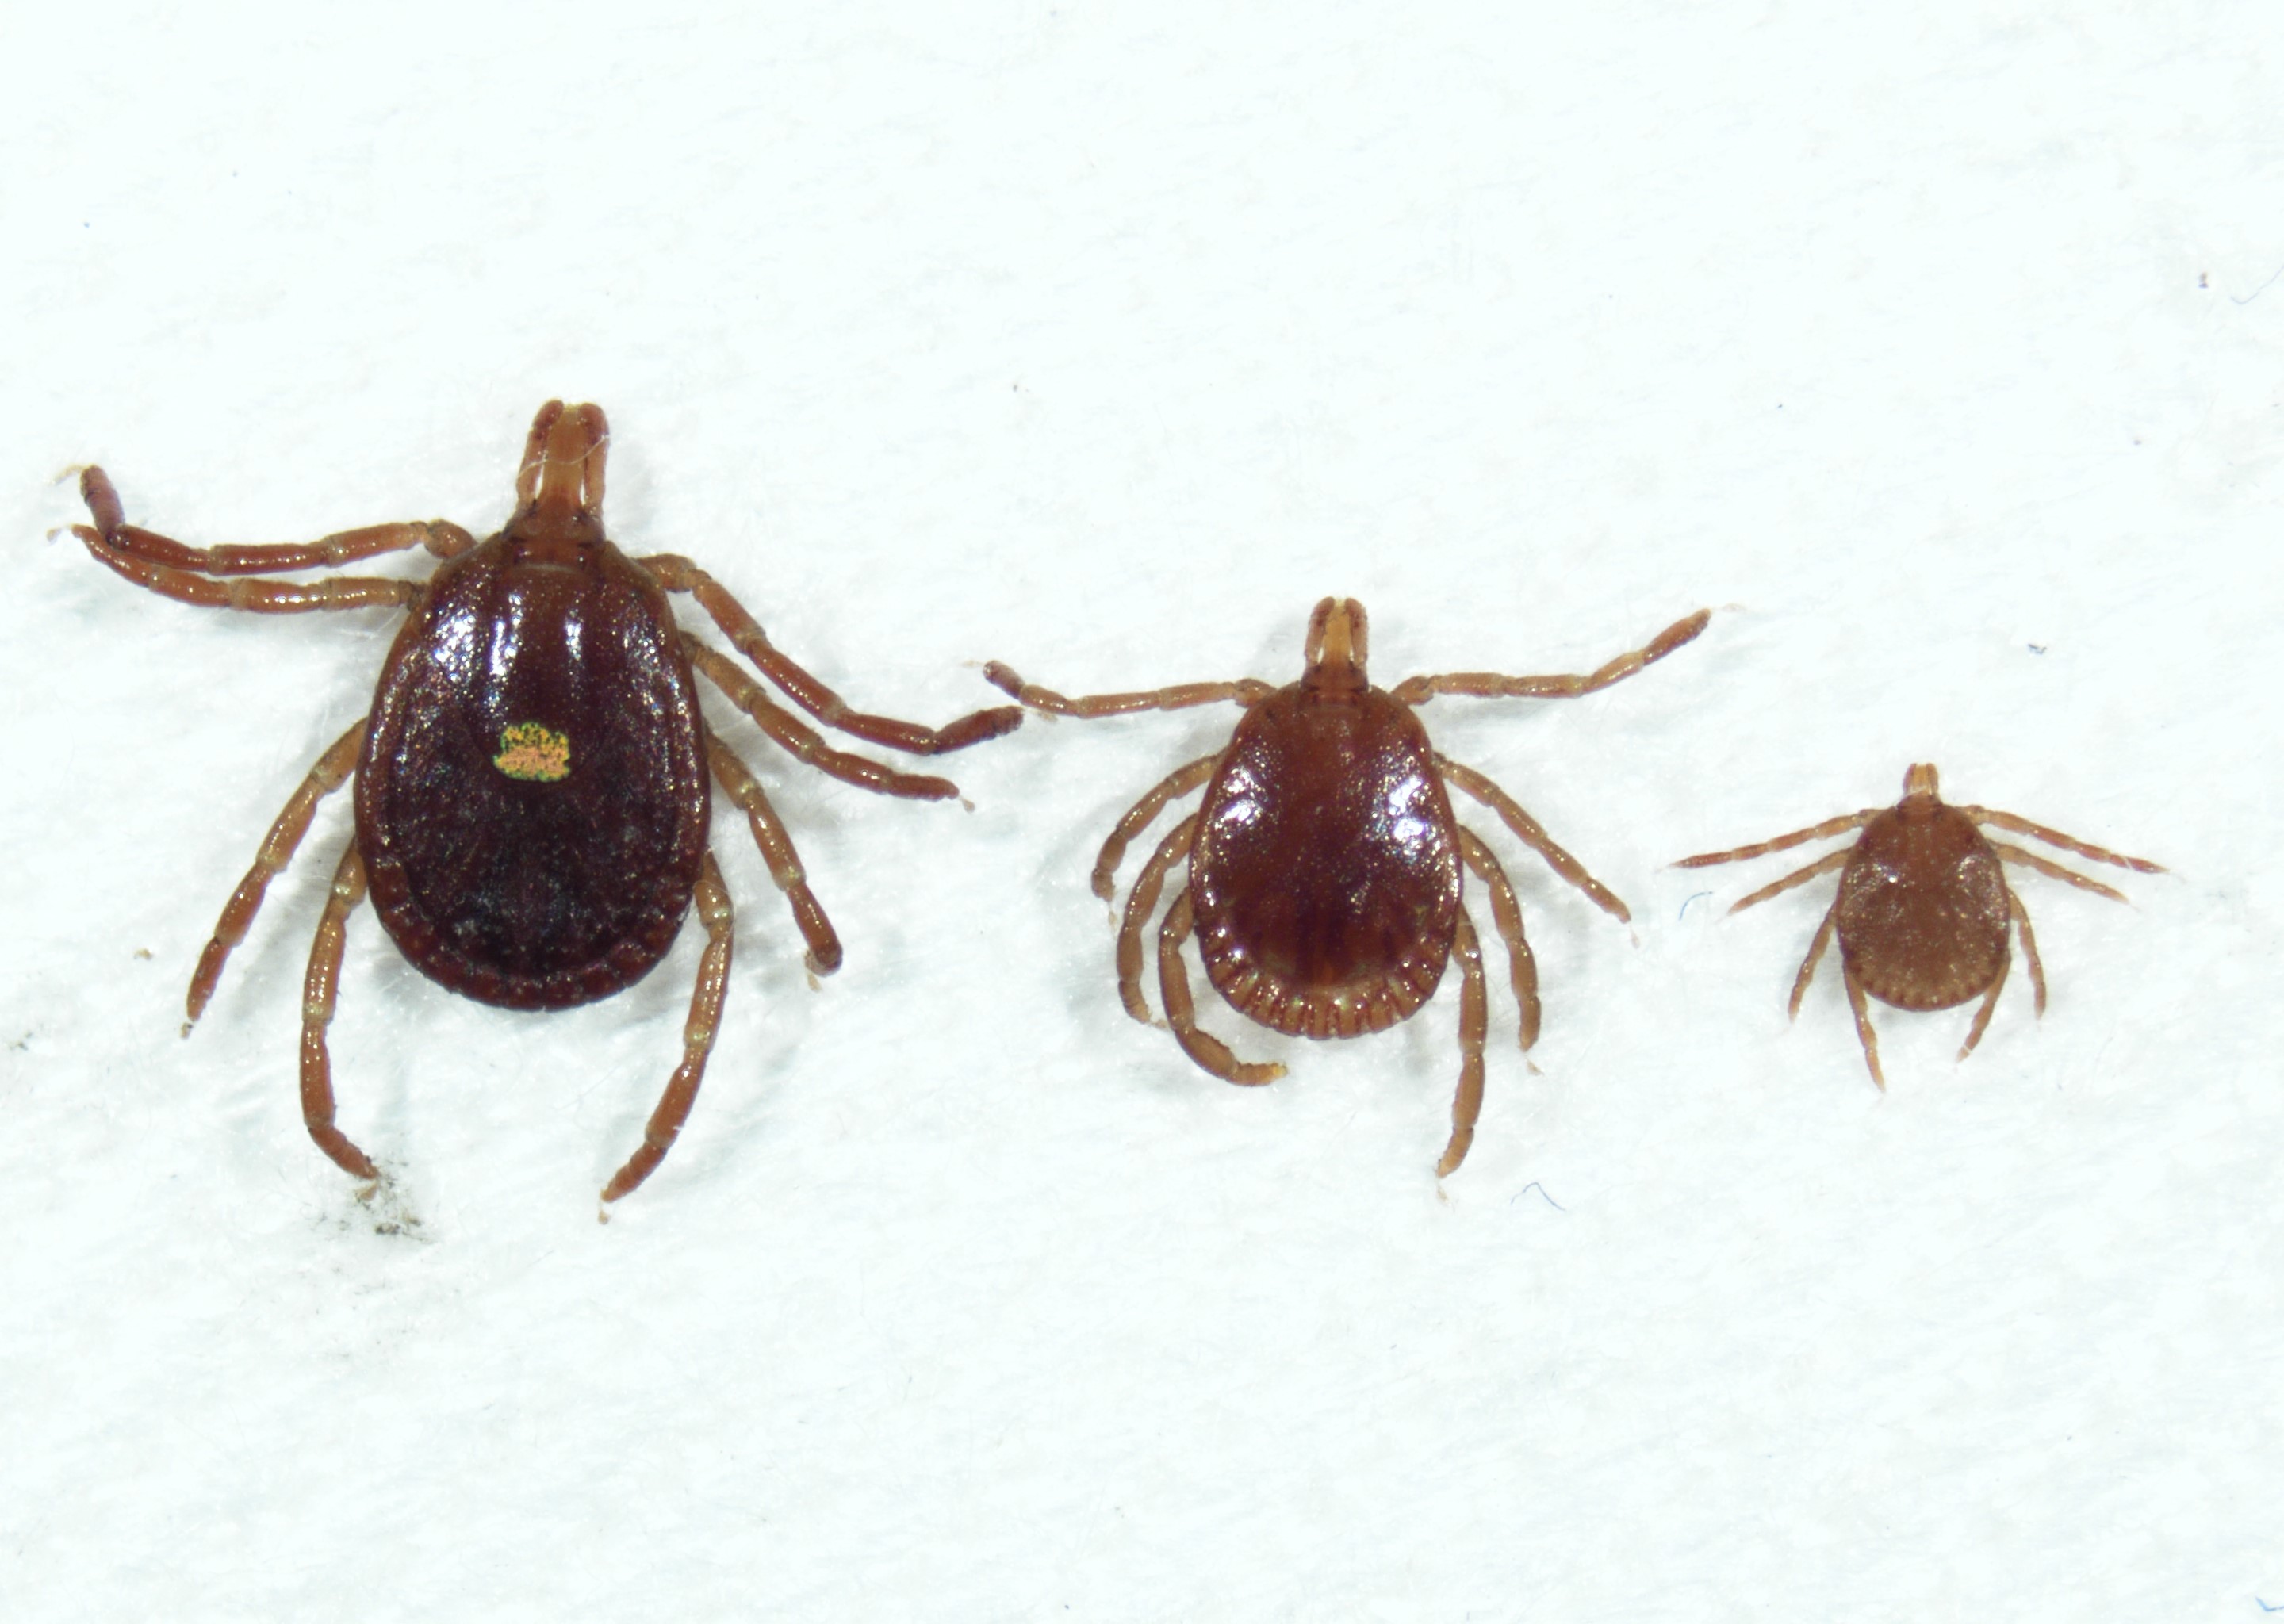 Adult female Lone Star tick (left) with adult male (center) and nymph (right). Photo: Indiana Department of Health.